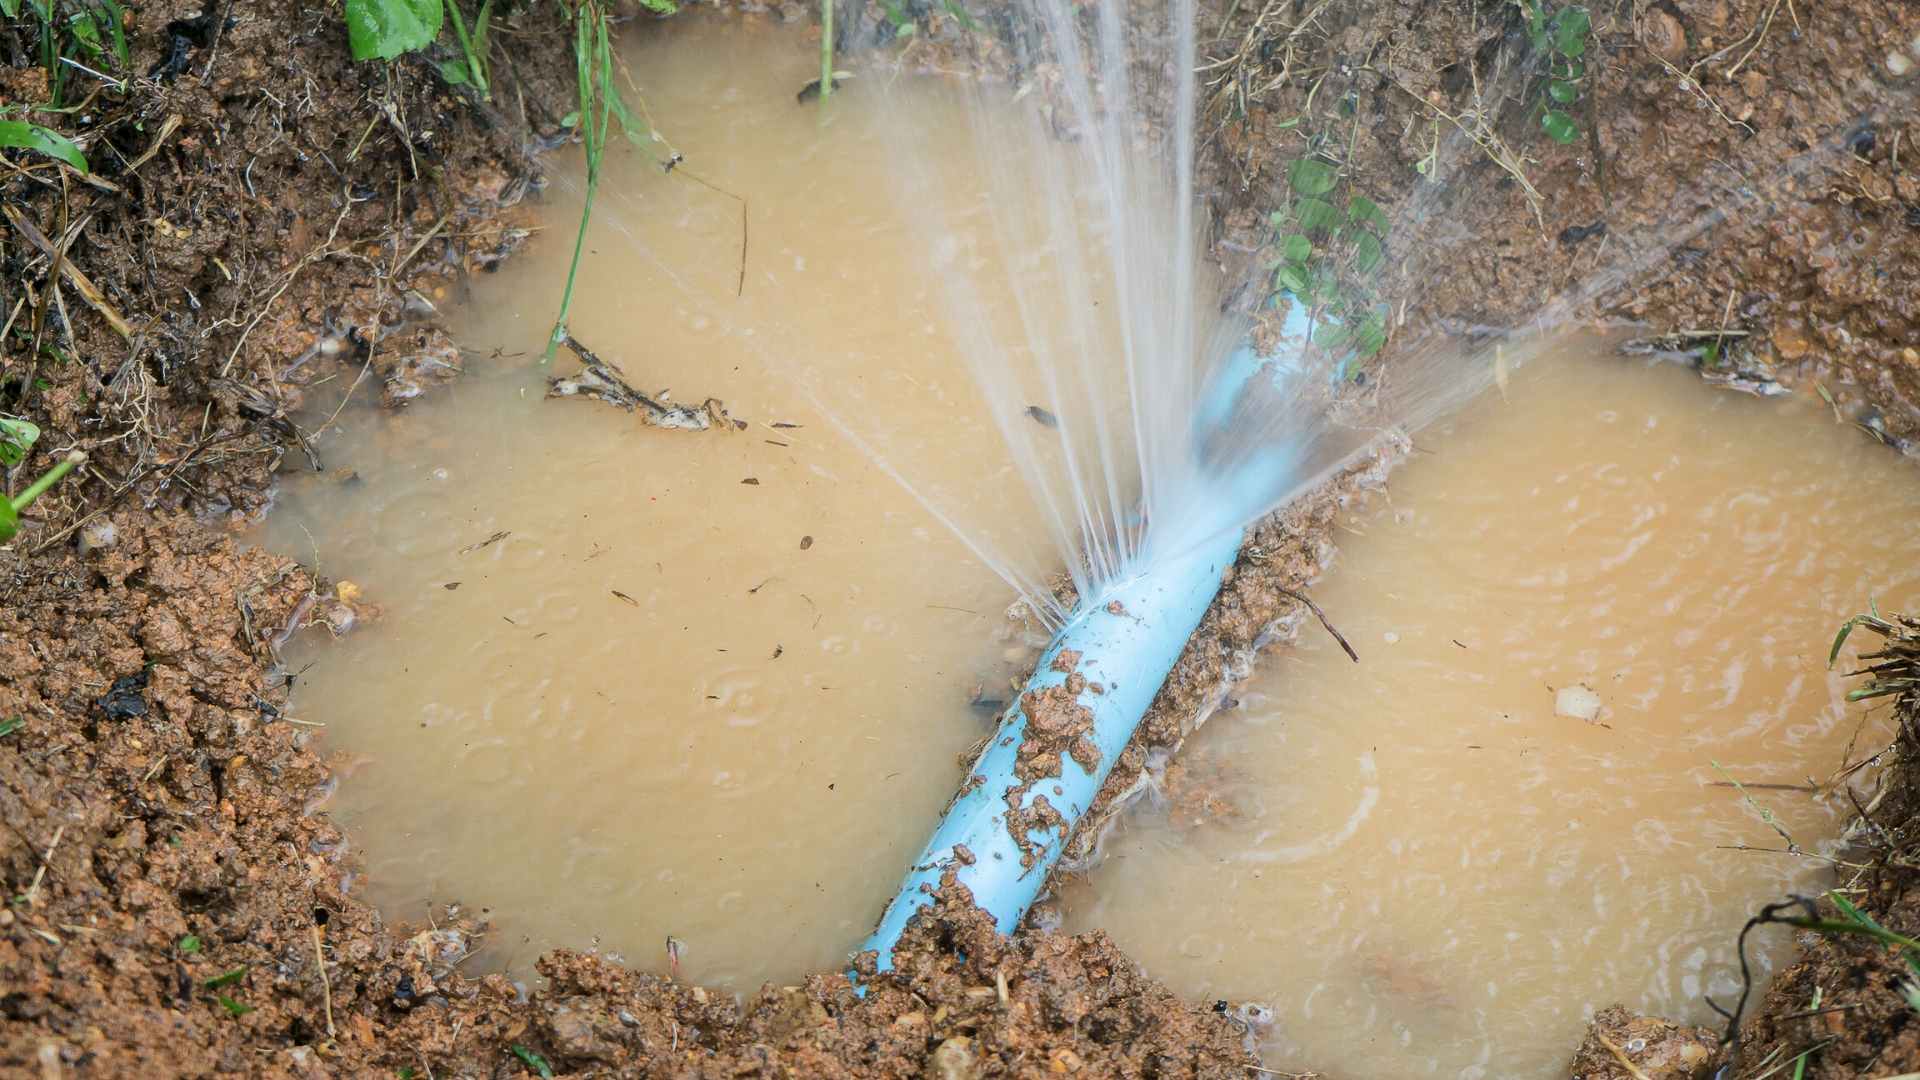 Pipe Burst - 5 Steps To Follow If You Discover A Pipe Burst On Your Property